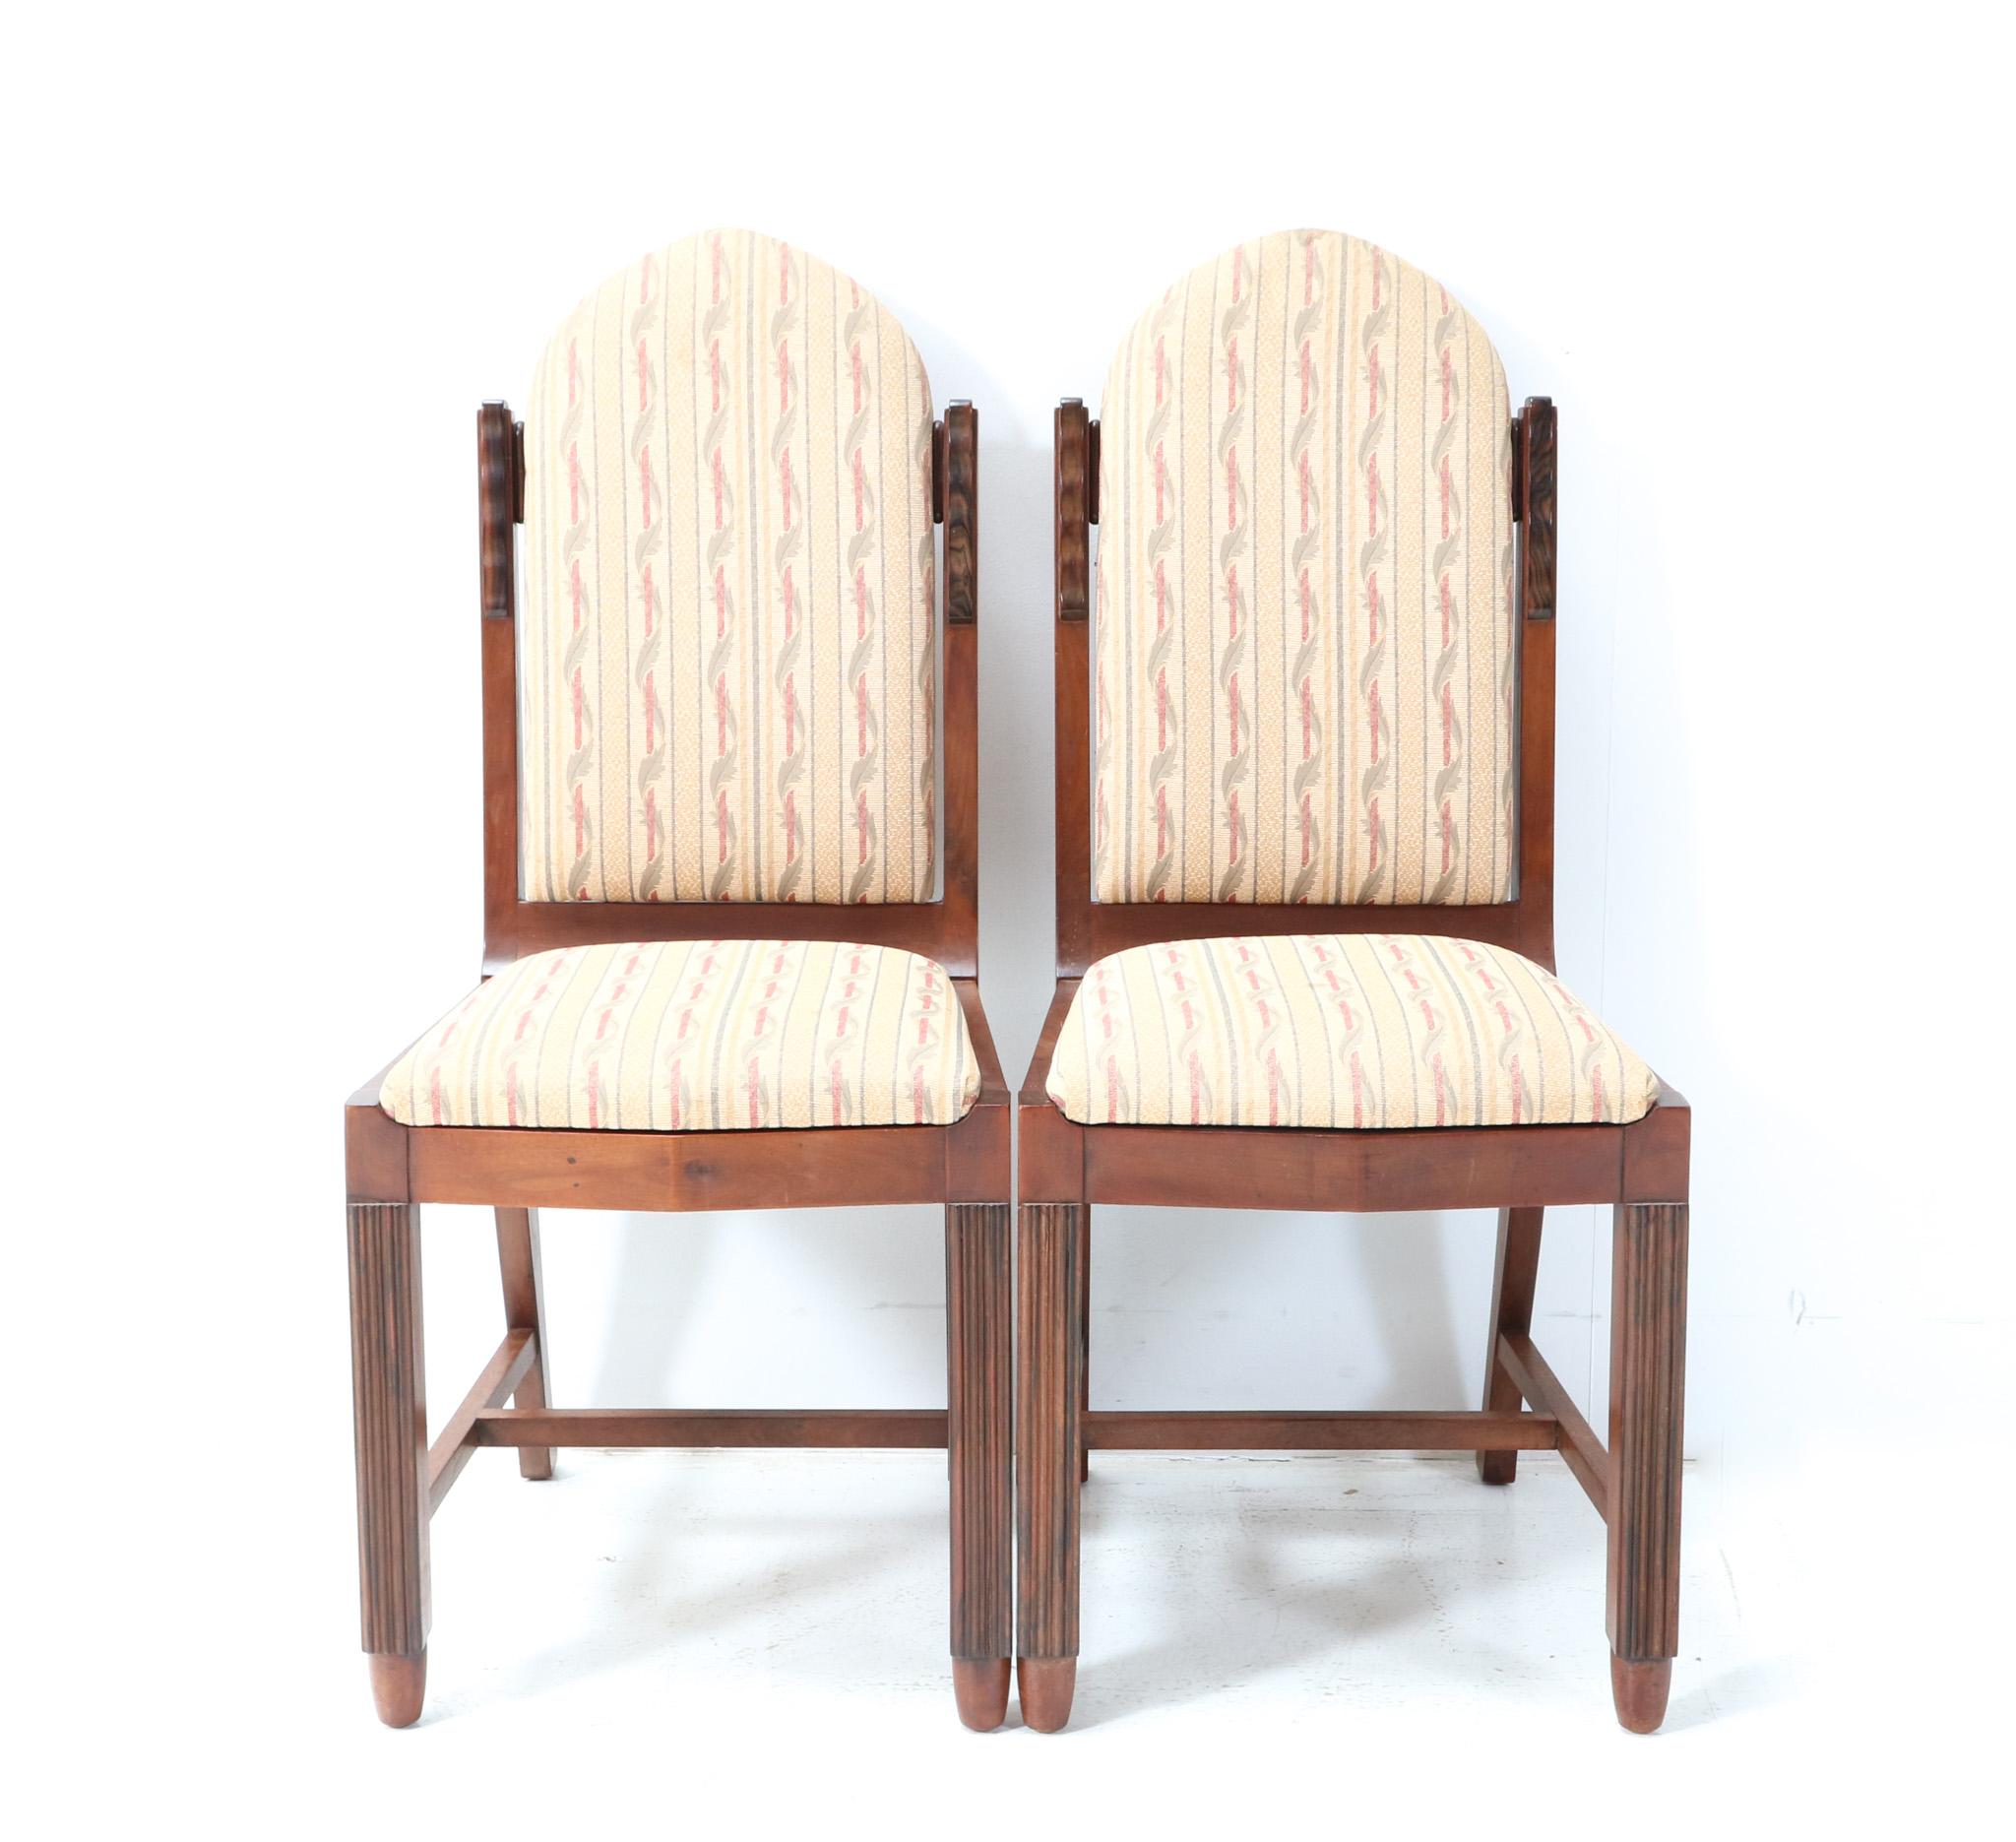 Early 20th Century Four Walnut Art Deco Amsterdamse School Dining Room Chairs by Fa. Drilling, 1924